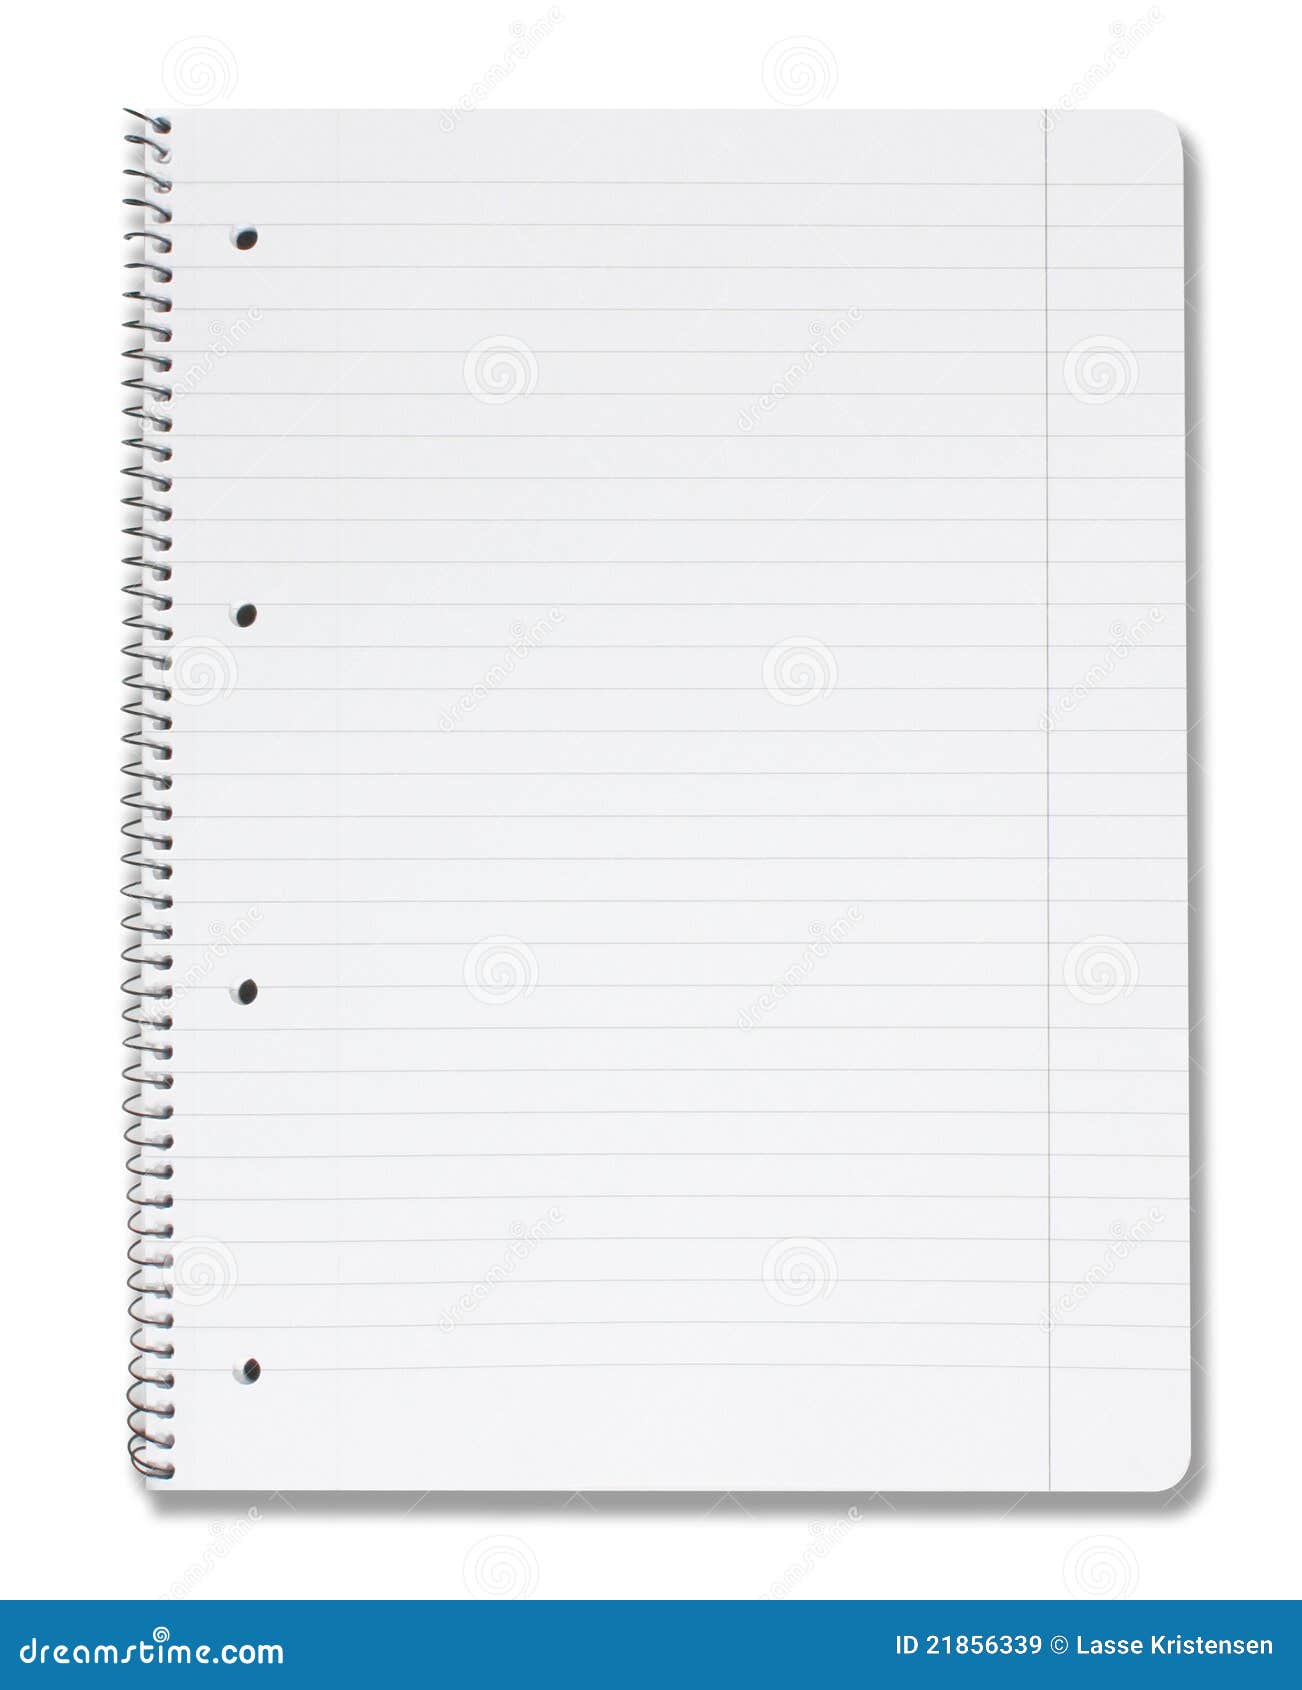 Empty Notepad Royalty Free Stock Images - Image: 21856339